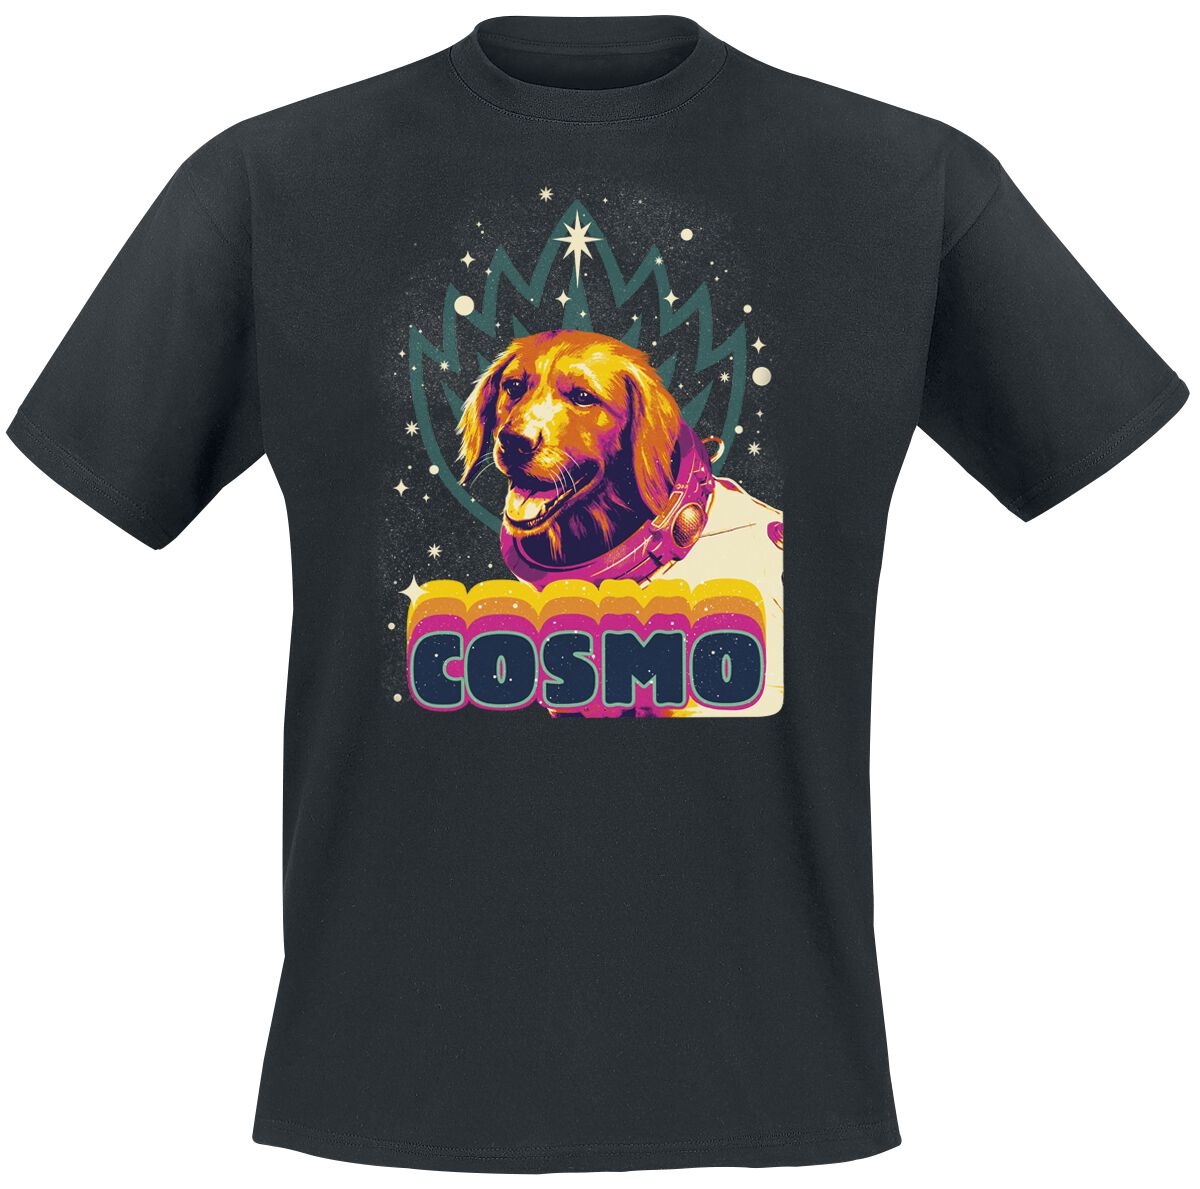 Guardians Of The Galaxy Vol. 3 - Cosmo T-Shirt schwarz in XXL von Guardians Of The Galaxy